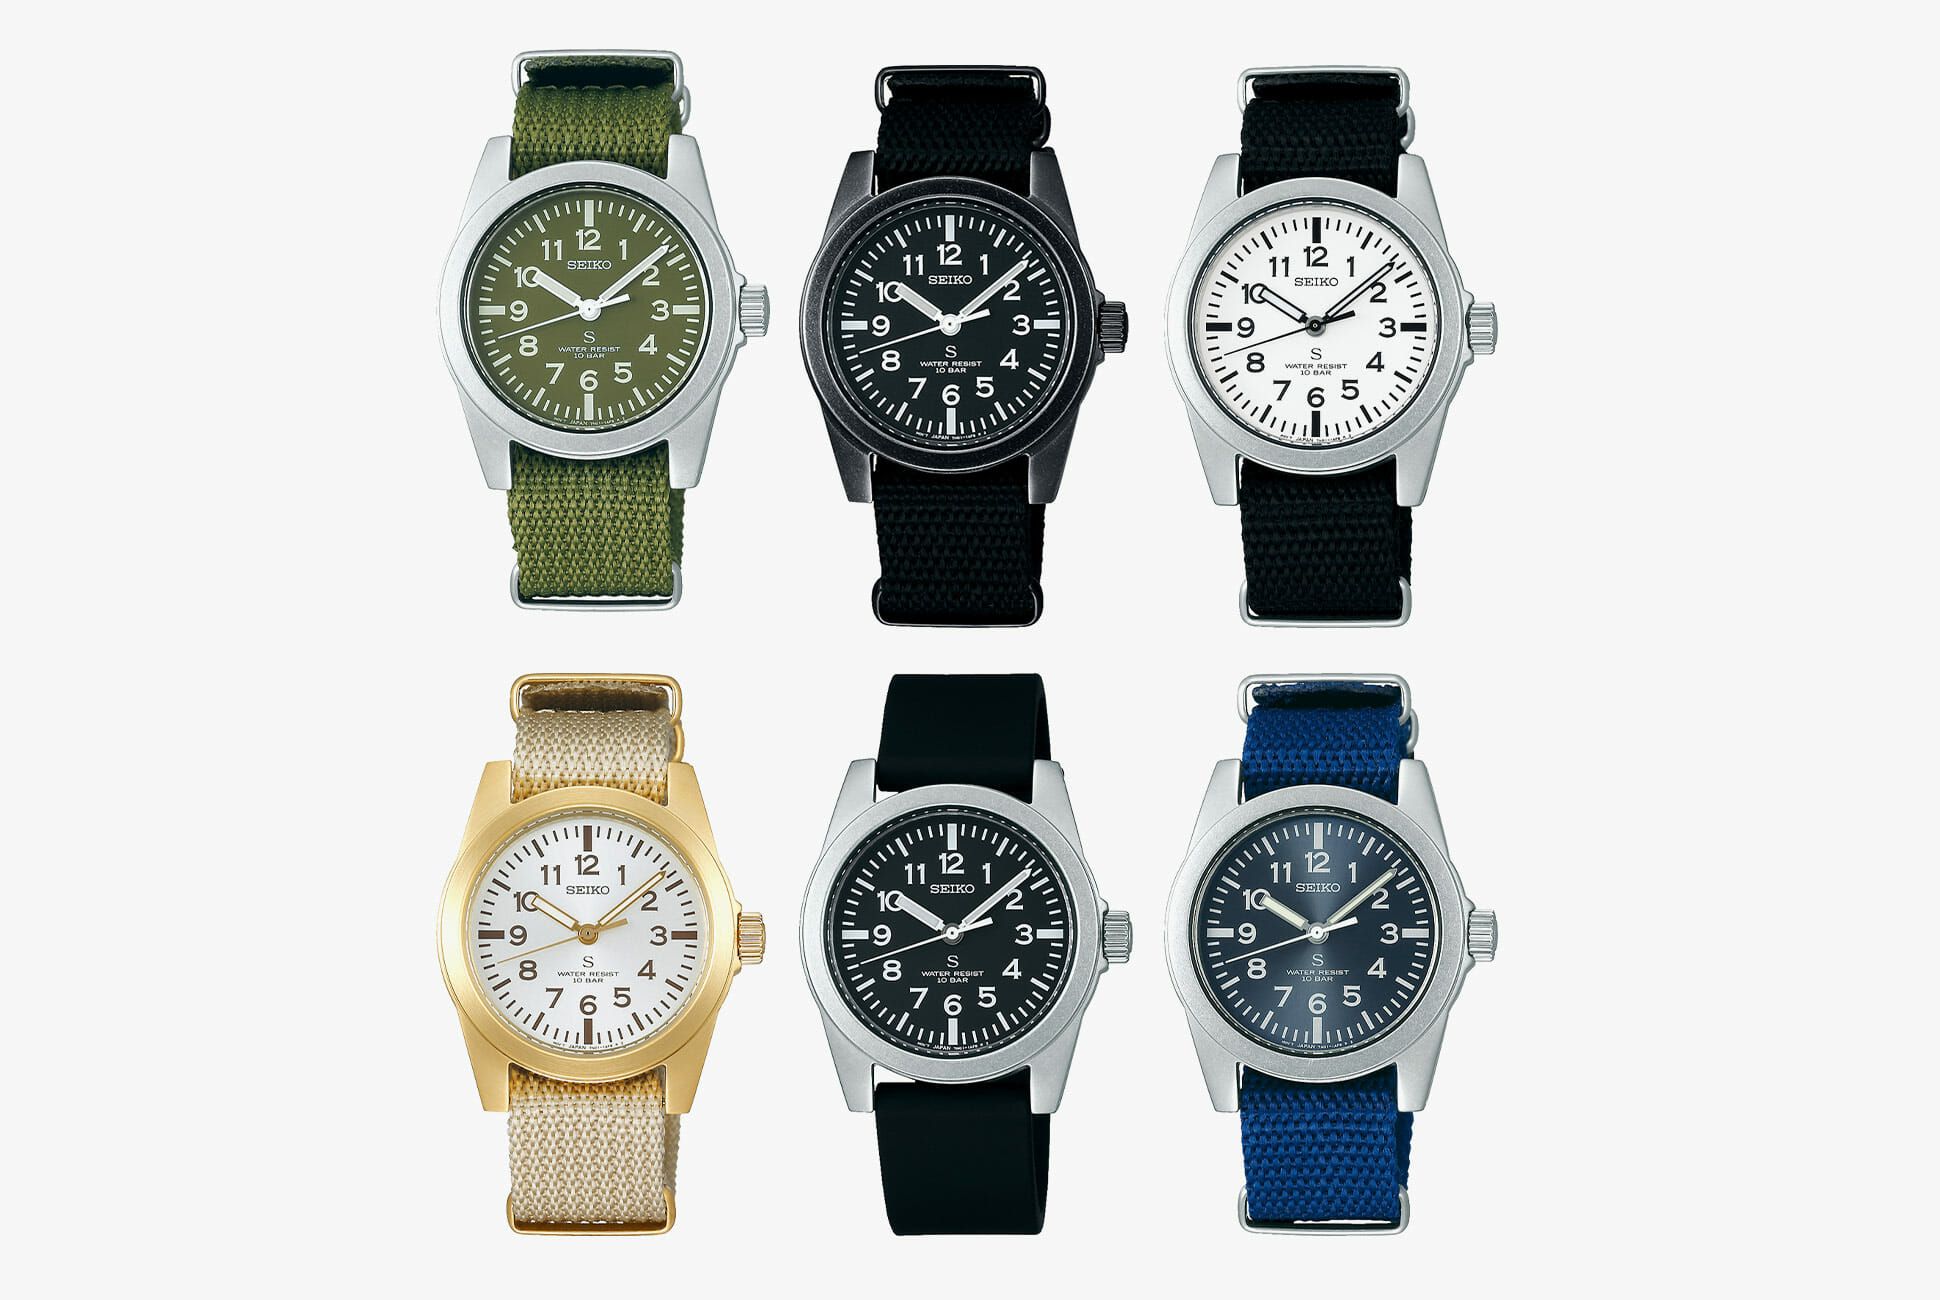 Seiko Has Released an Affordable New Field Watch